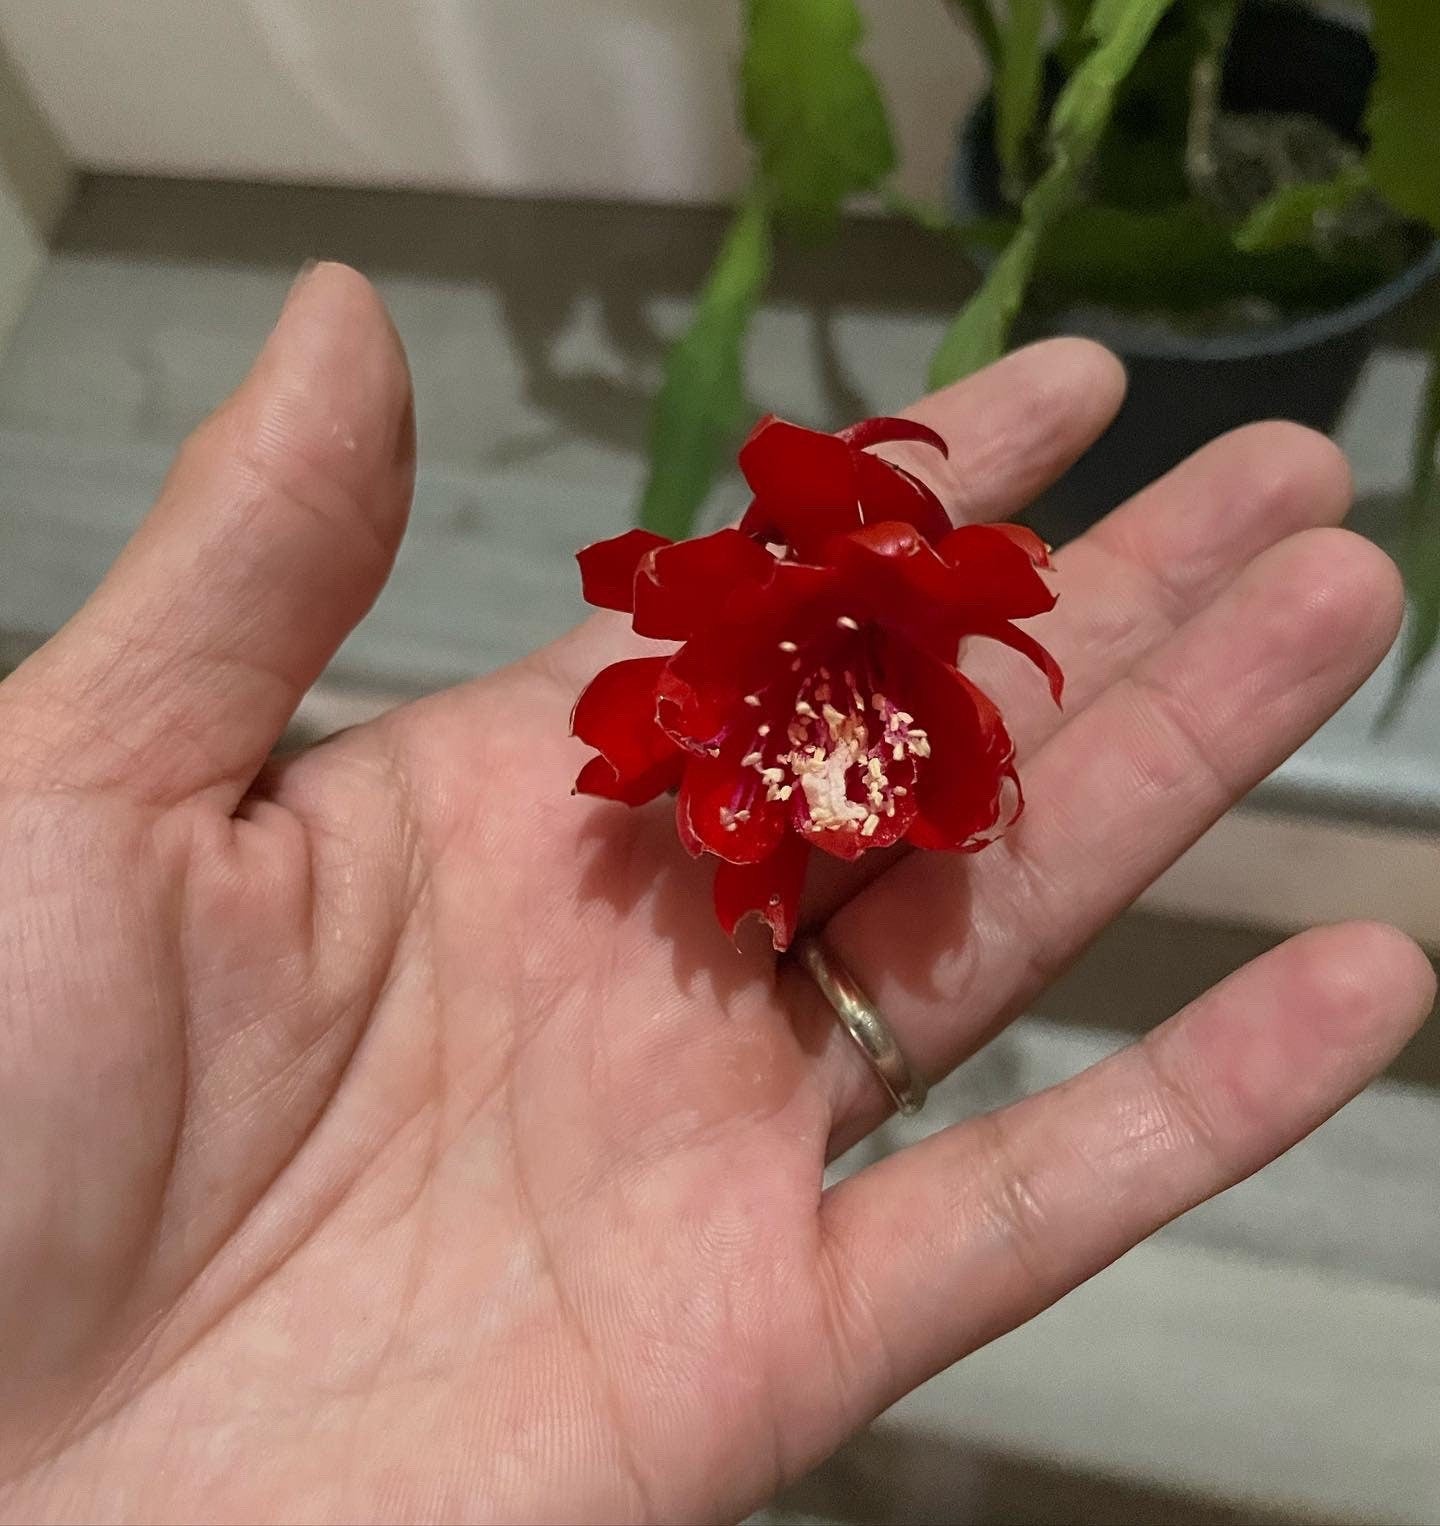 XL -1 gallon -rare red flower epiphyllum-exact plant as picture -blooming as of 10/1- small red flowers noid Disocactus hybrid .